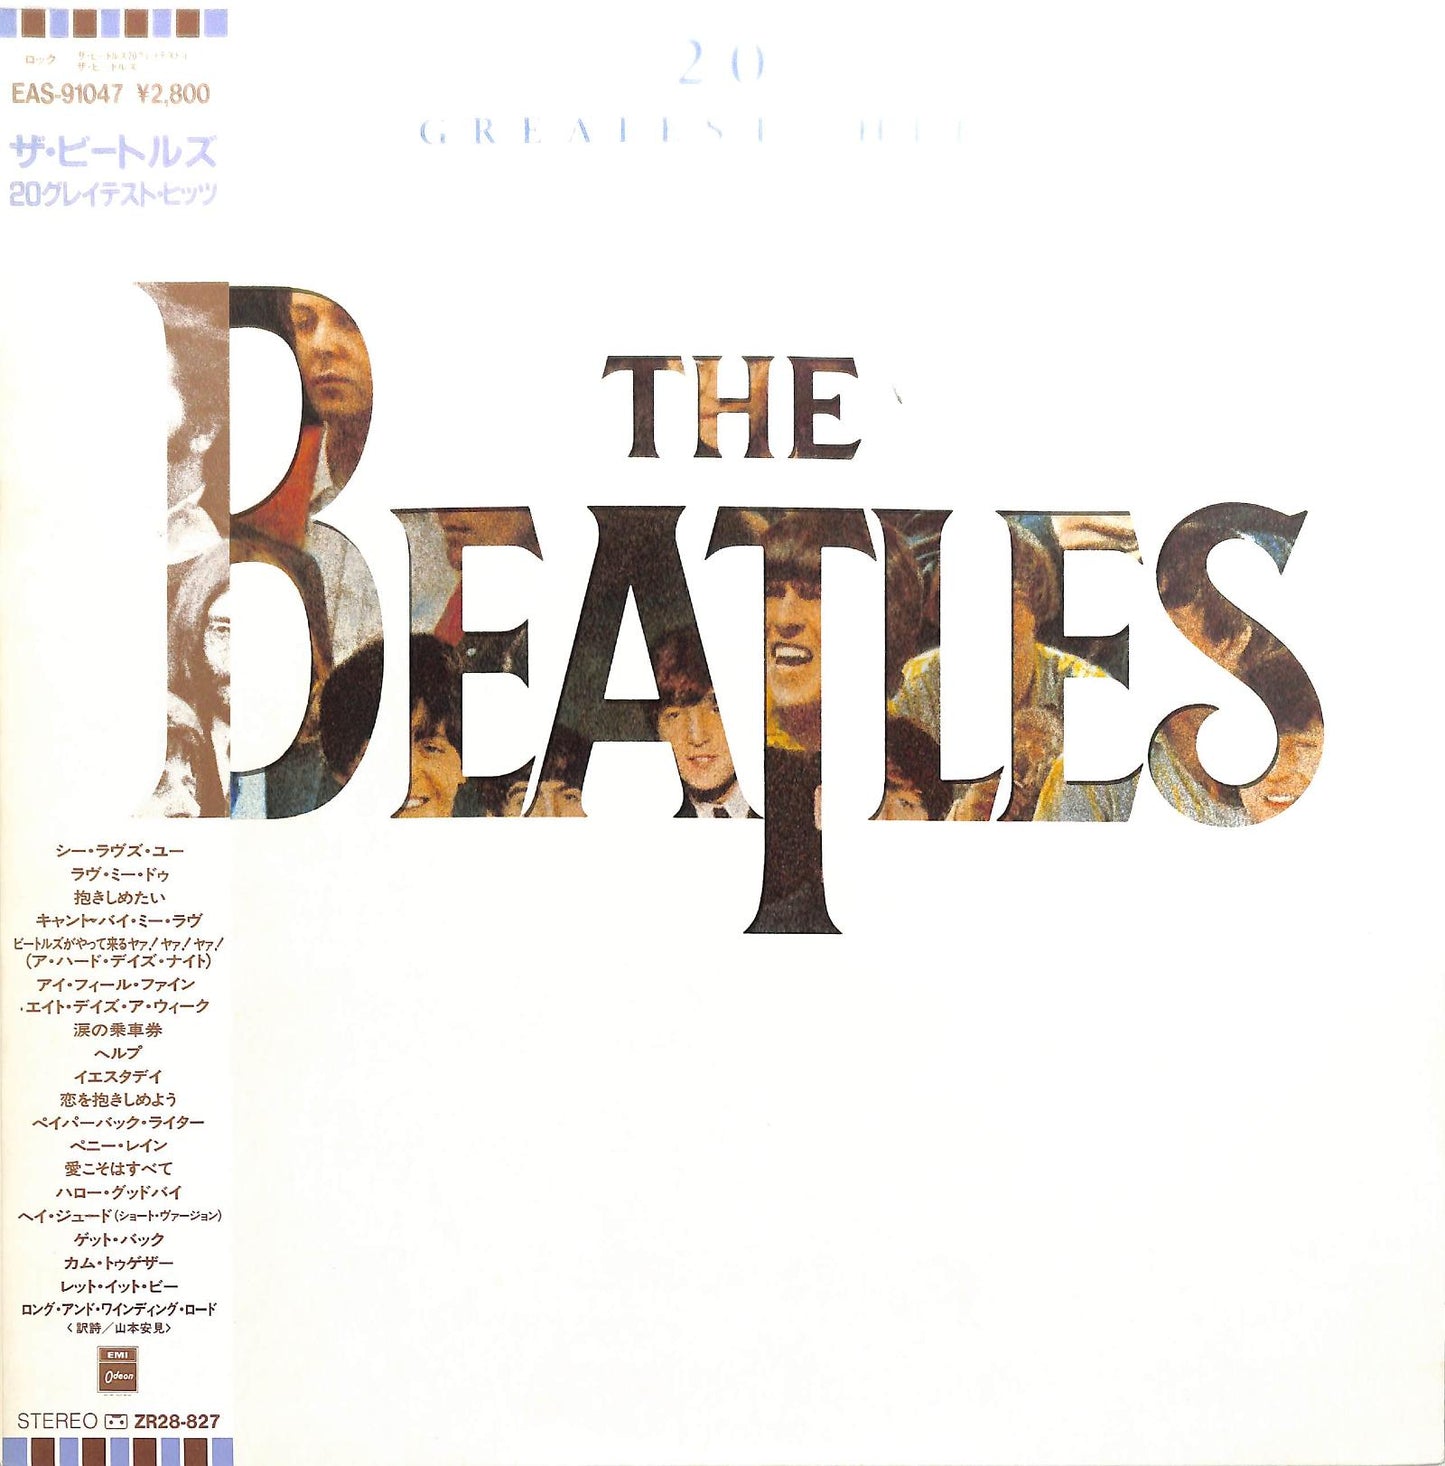 THE BEATLES - 20 Greatest Hits